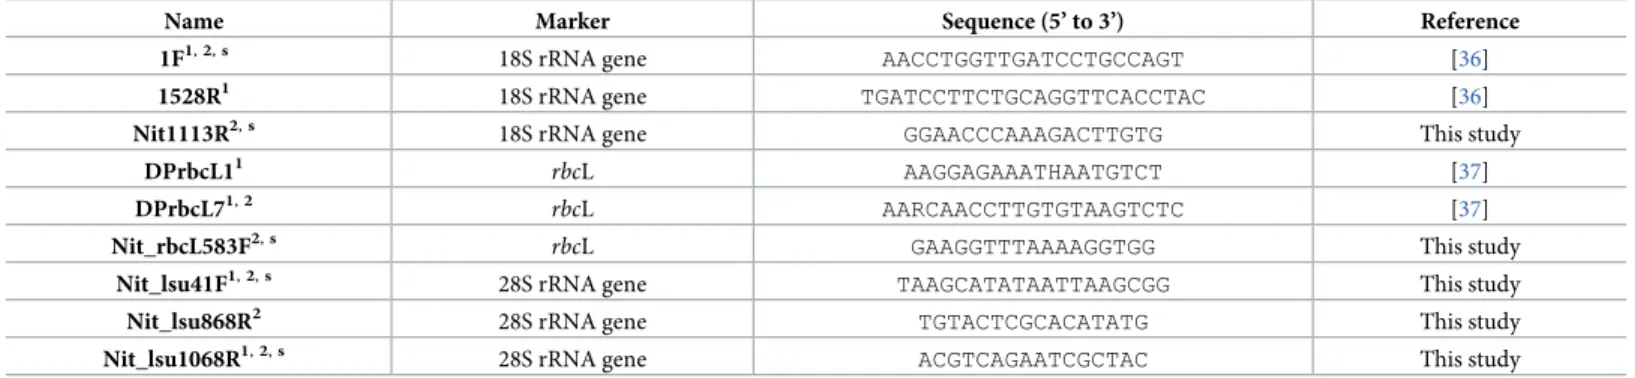 Table 1. Primers used for amplification and sequencing of 18S rRNA and rbcL genes from the undescribed Nitzschia species.